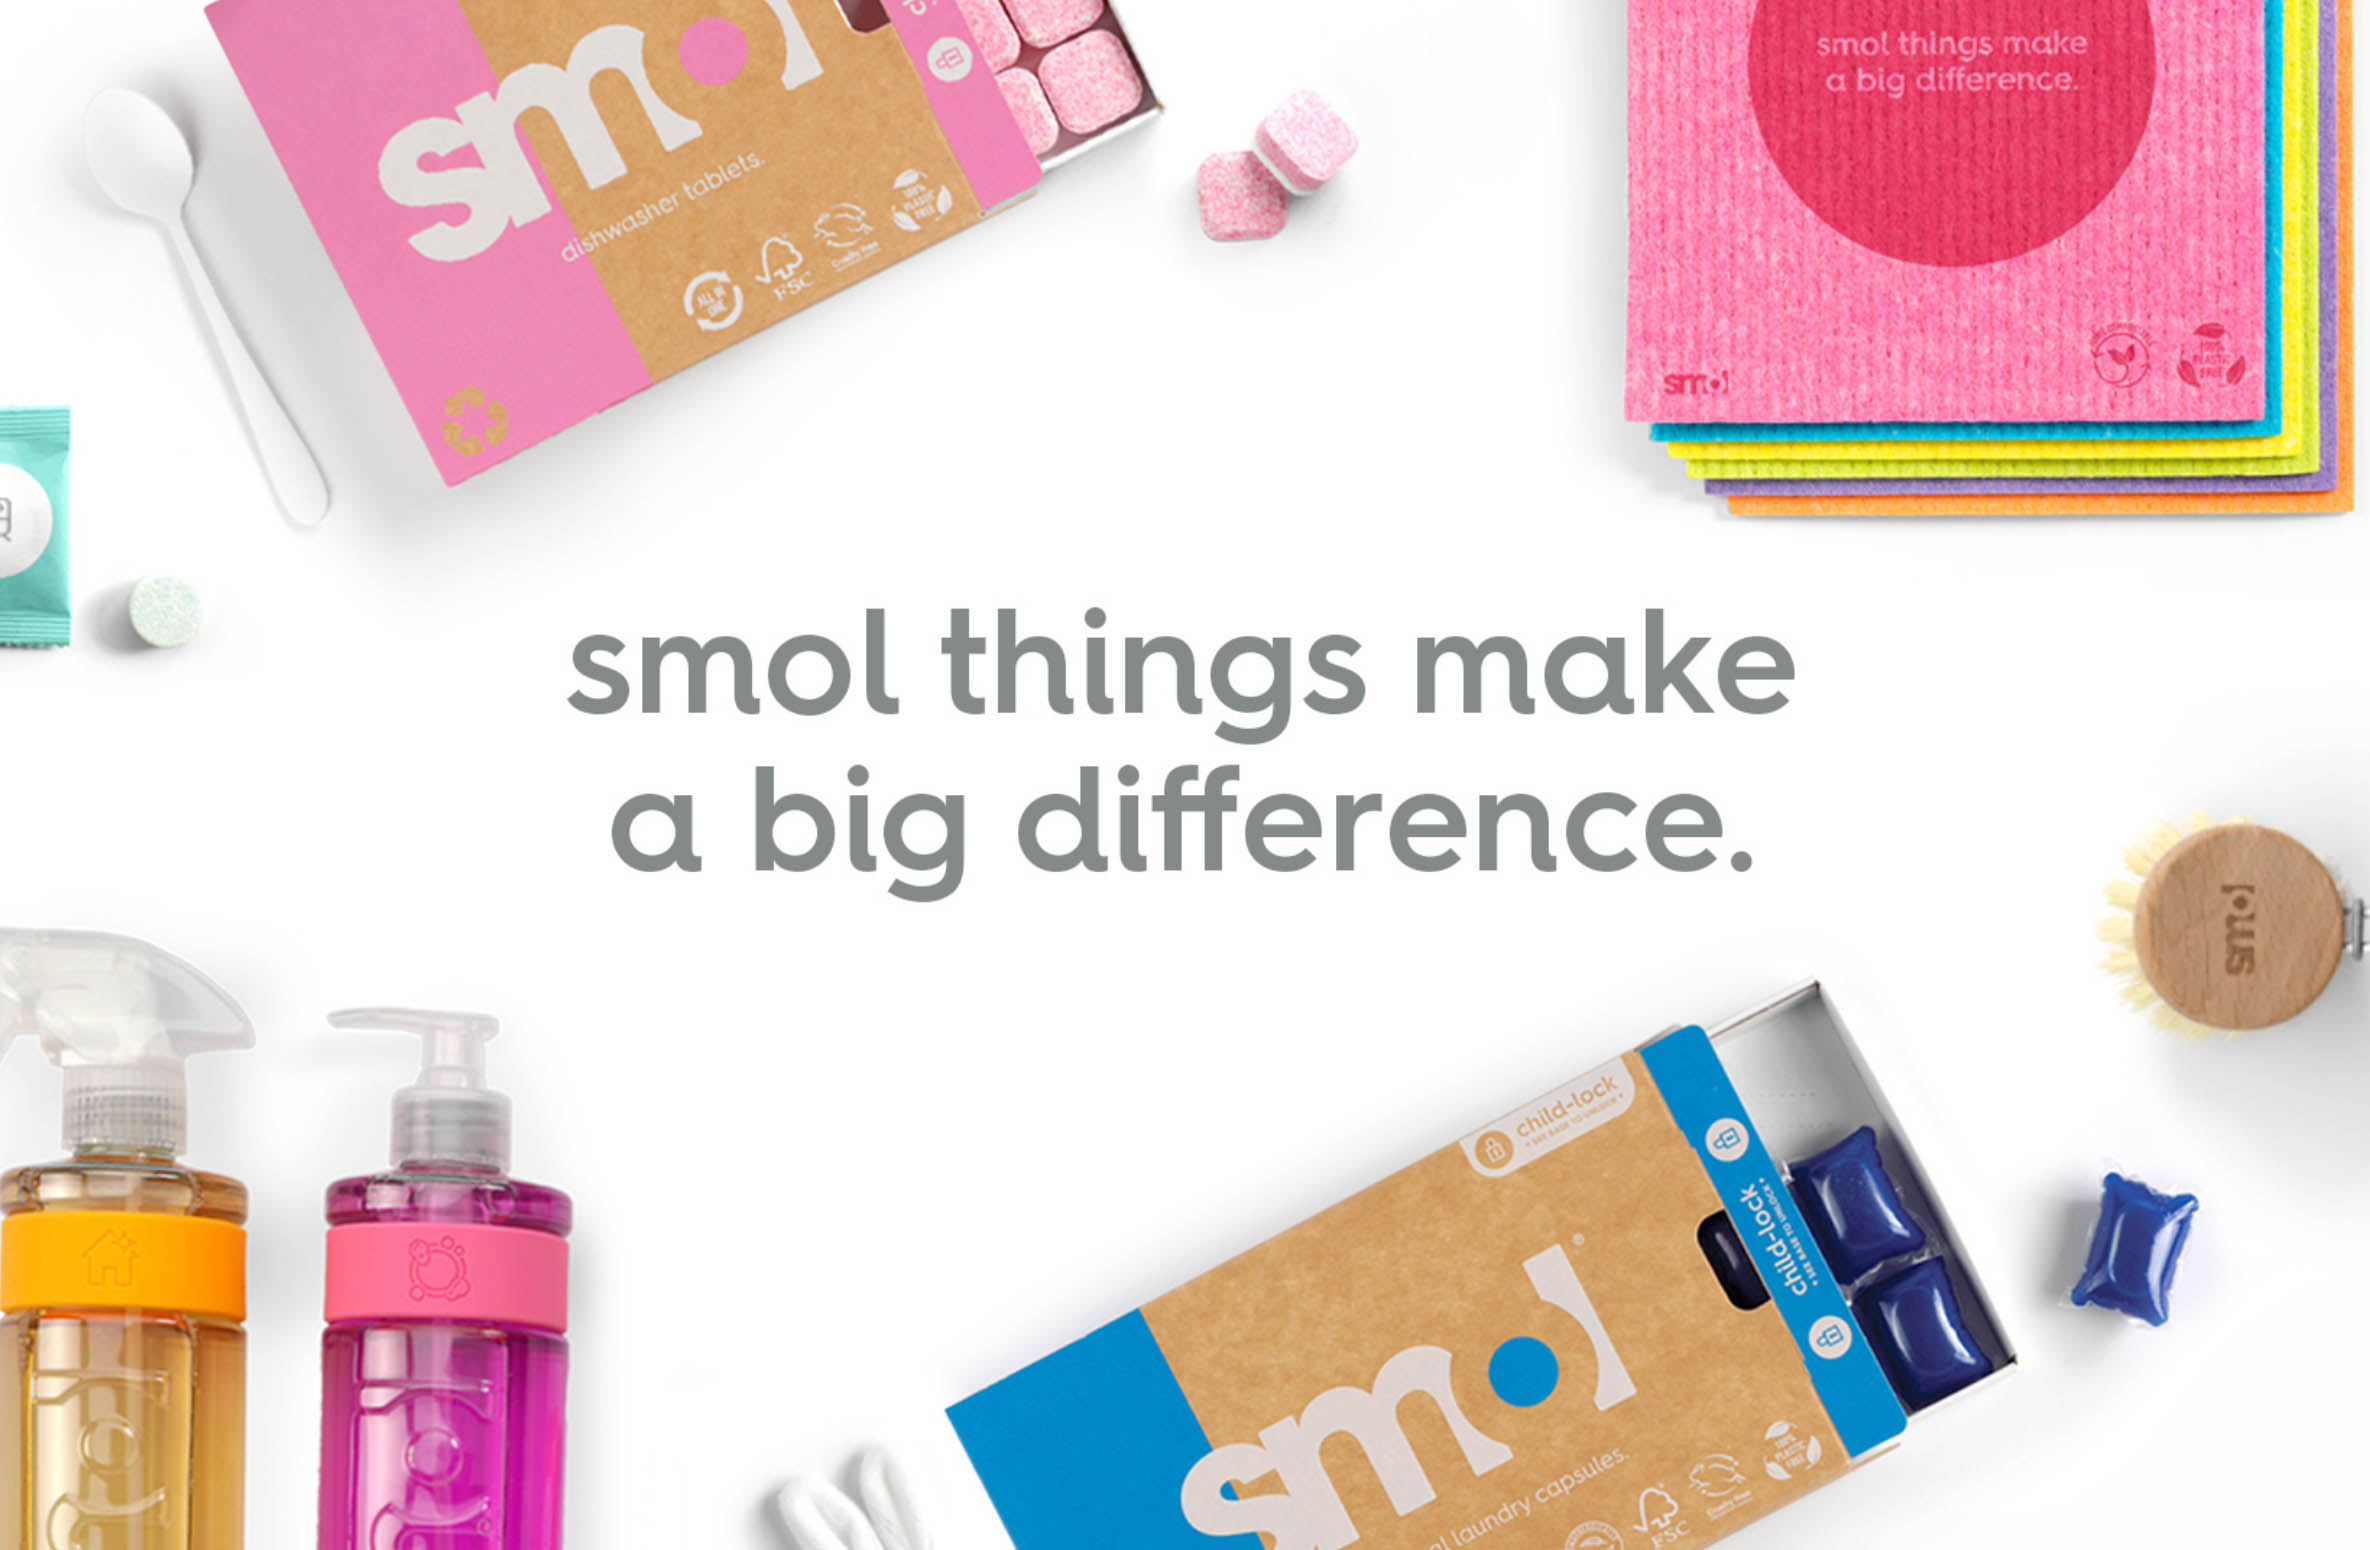 smol make cleaning eco-friendly?